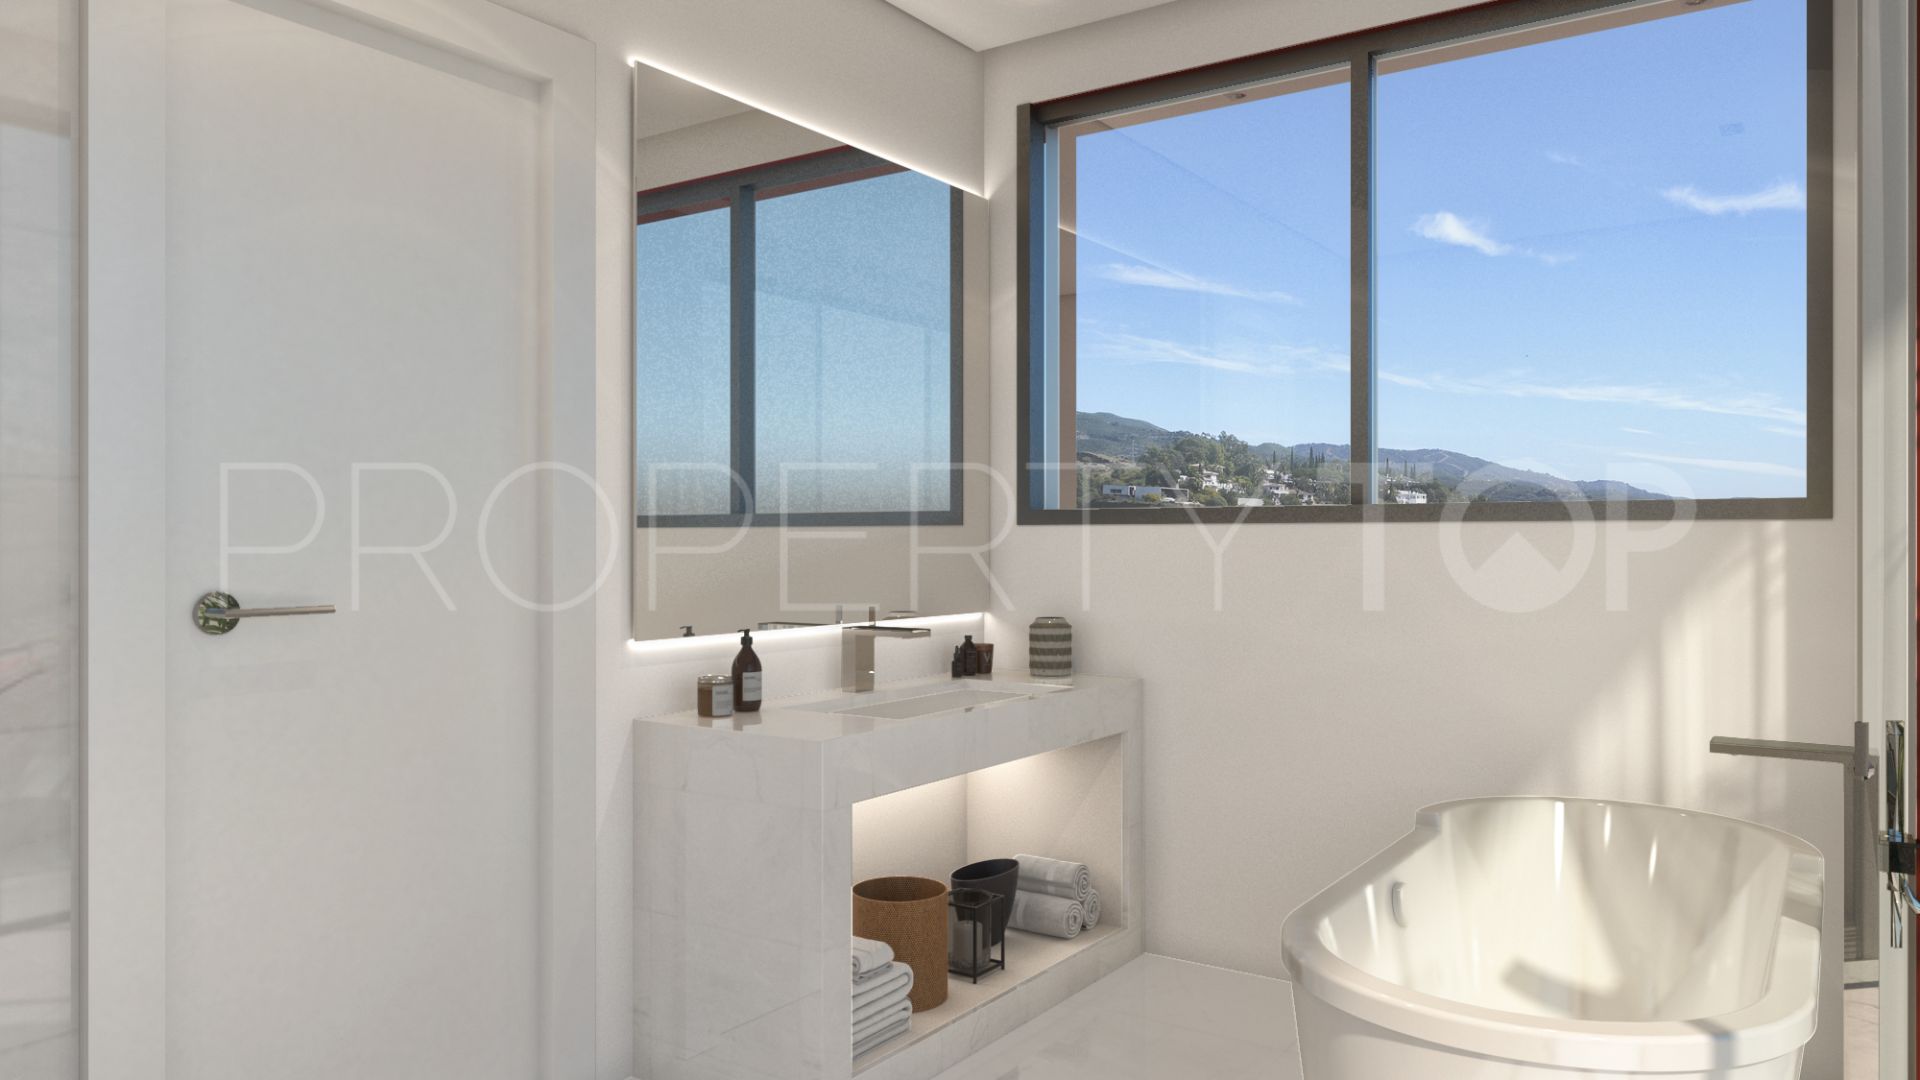 For sale 2 bedrooms duplex penthouse in Rio Real Golf